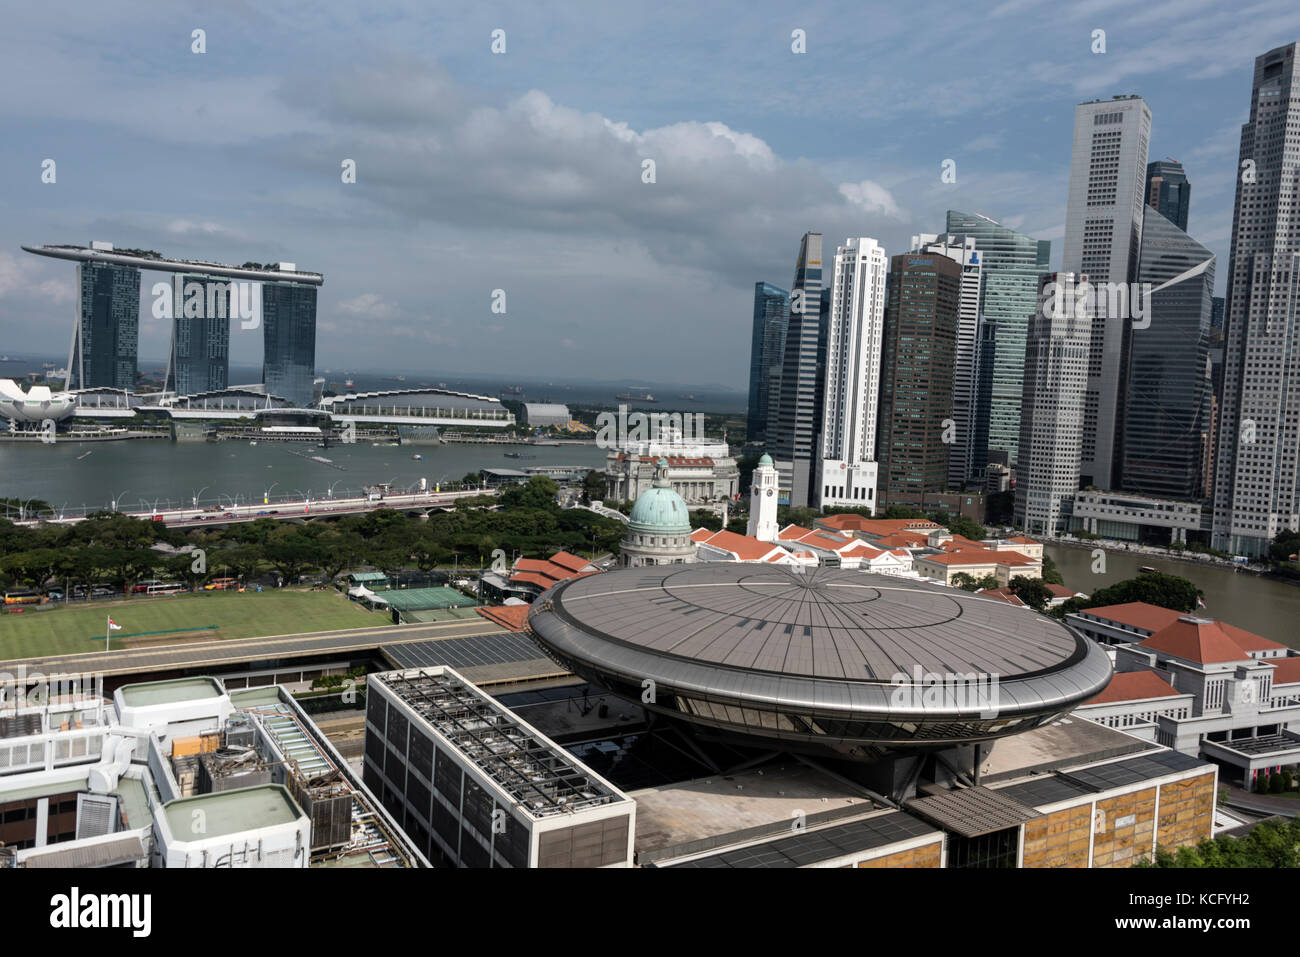 Photograph of the week: Marina Bay Sands, Singapore - A Luxury